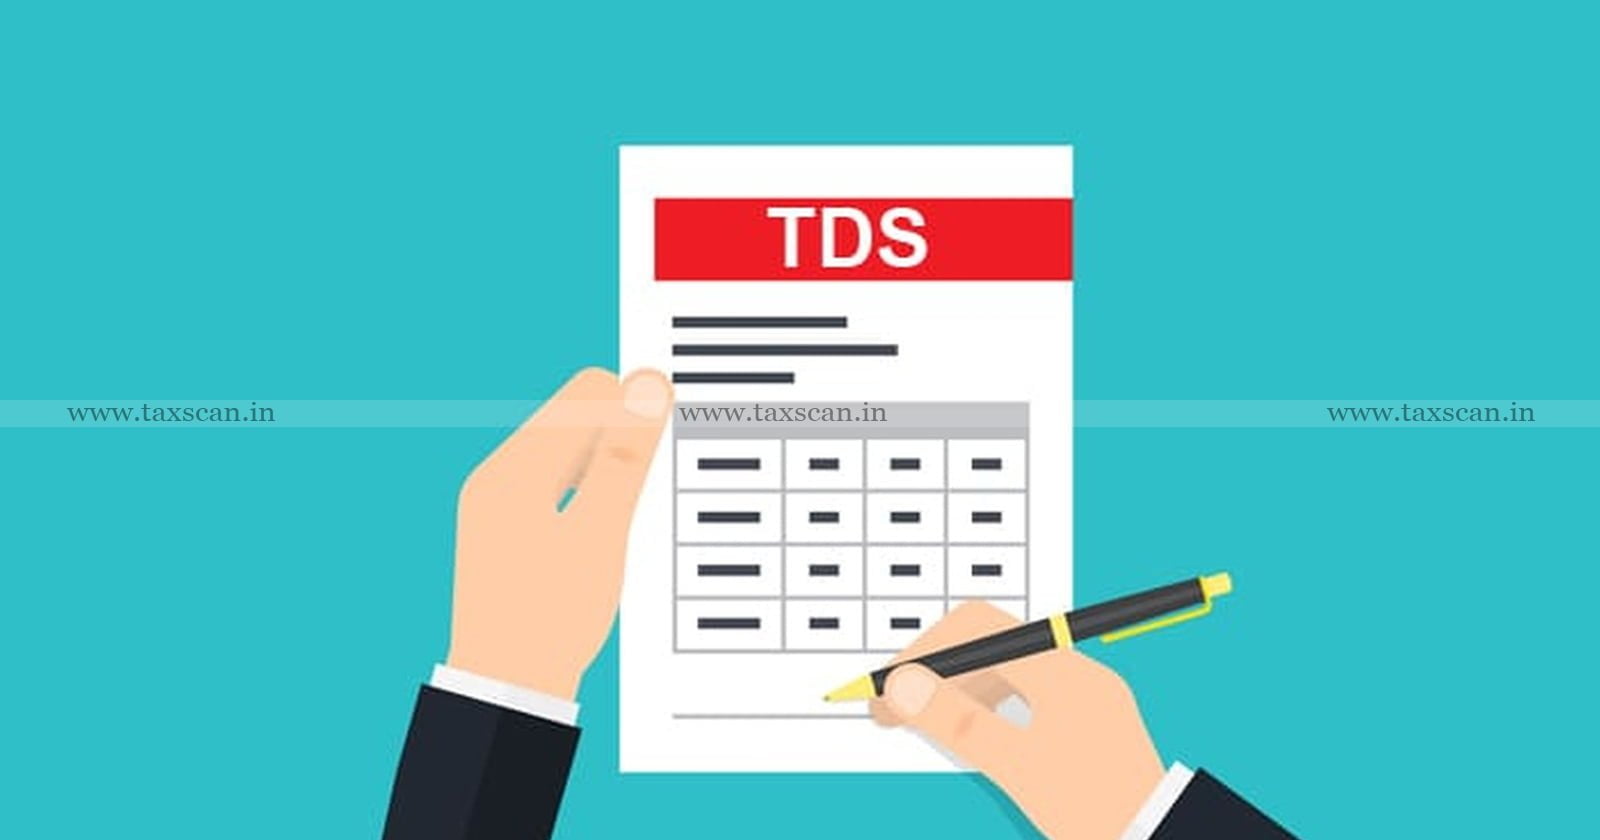 TDS - Consideration - Transfer of Immovable Property - Immovable Property - ITAT - Income Tax - taxscan